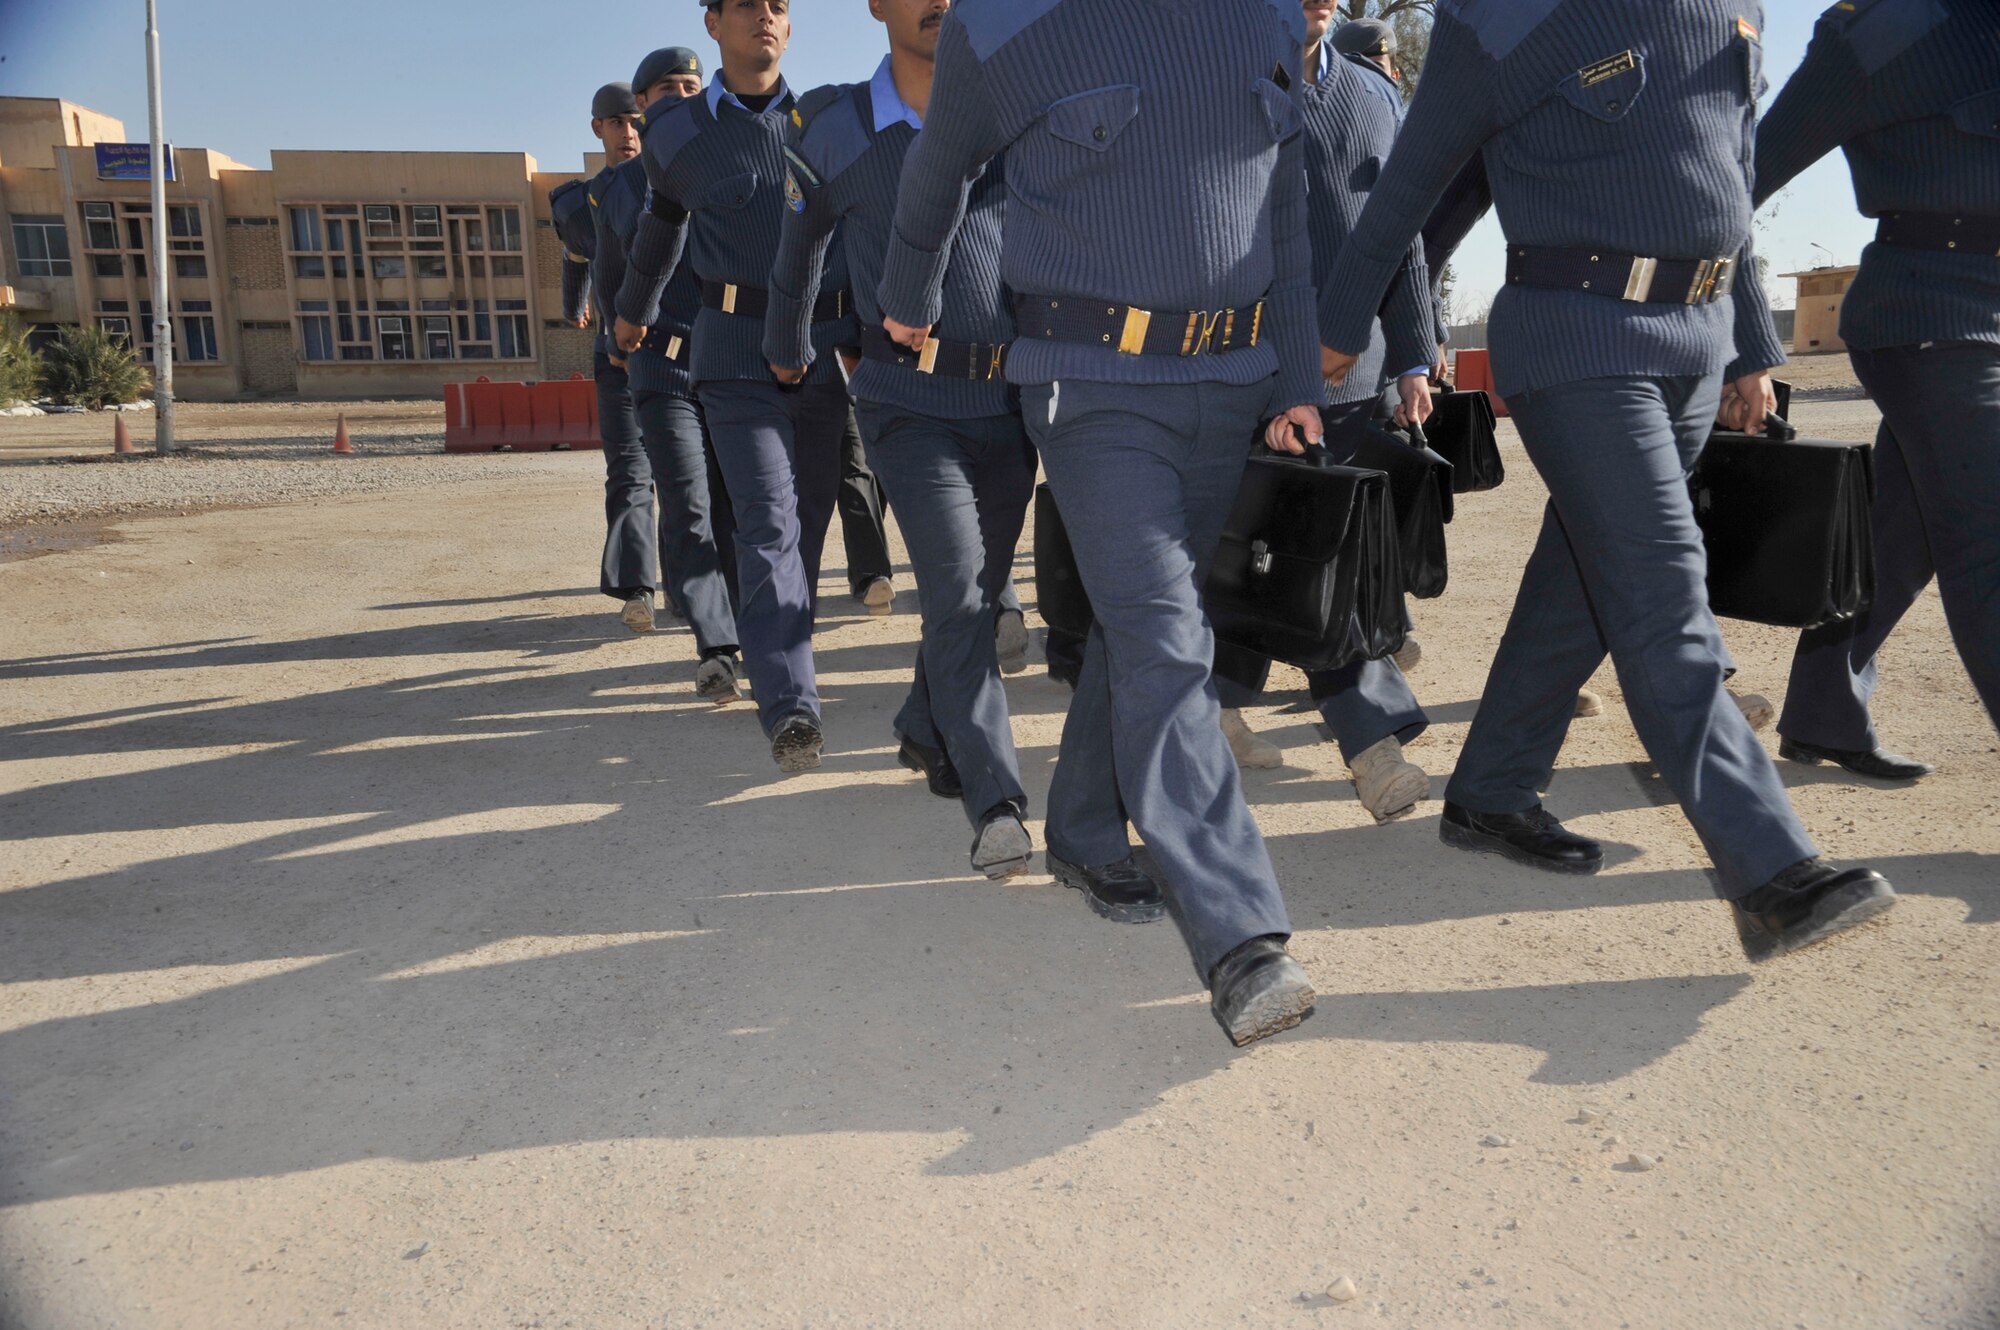 Cadet pilots at the Iraqi Air Force College march to class outside an academic building on the school's campus in Tikrit, Iraq. Students began training in September 2010, as part of the first class at the recently reopened academy. (U.S. Air Force photo/Senior Master Sgt. Larry Schneck) 